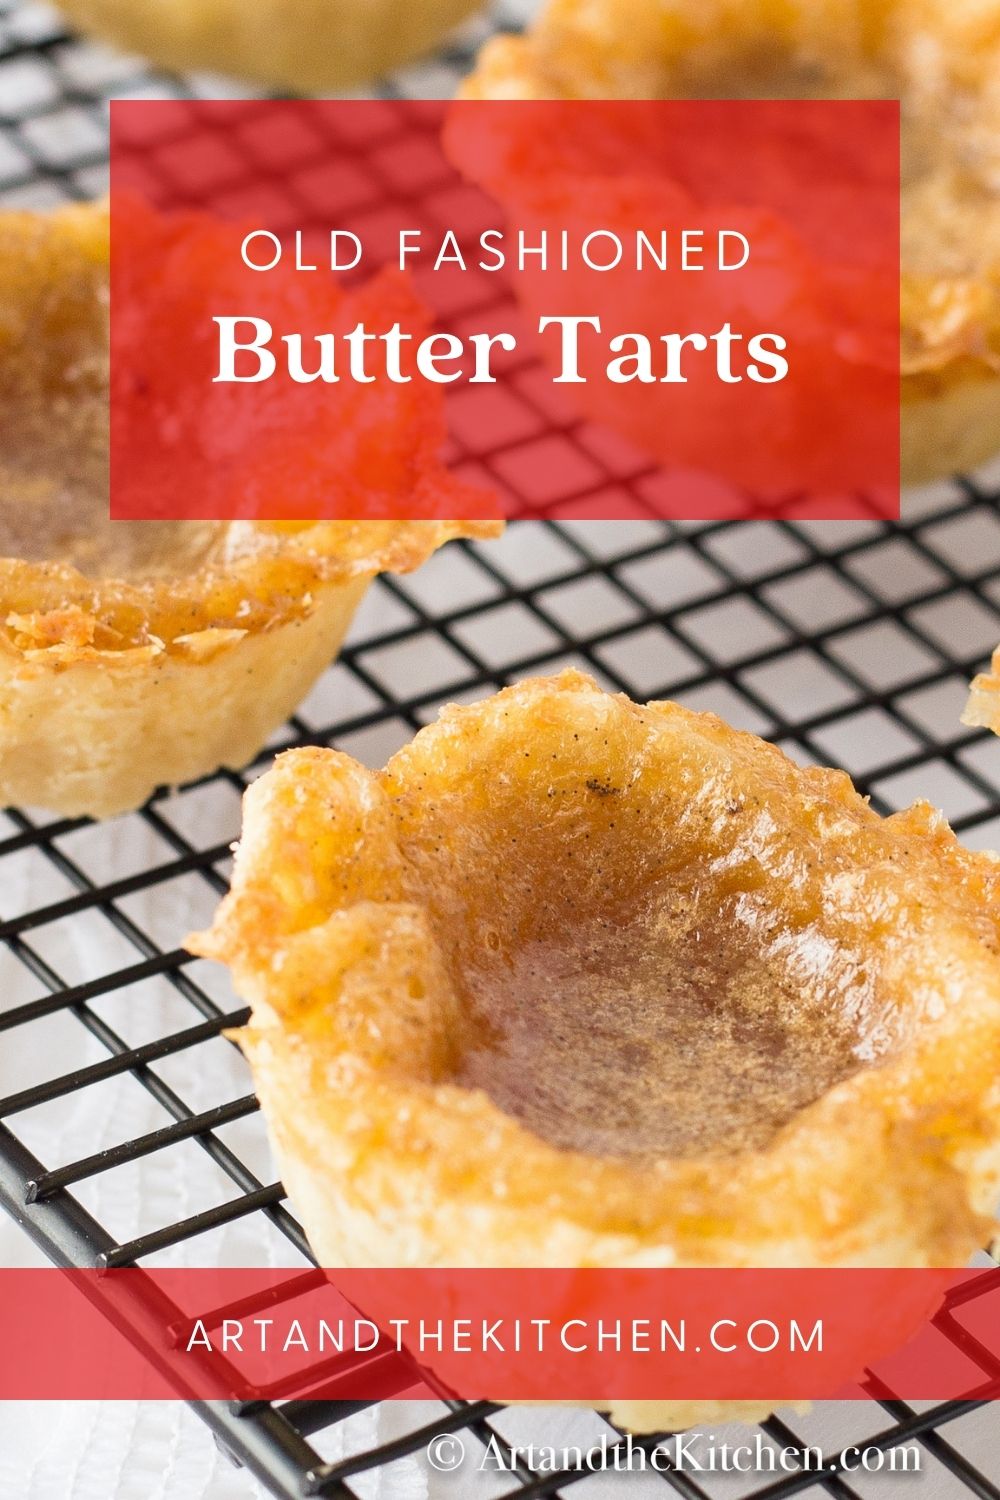 Indulge in some great Old Fashioned Butter Tarts. A Canadian classic dessert recipe with sweet, slightly runny filling and made from scratch, flaky, melt in your mouth pastry. via @artandthekitch